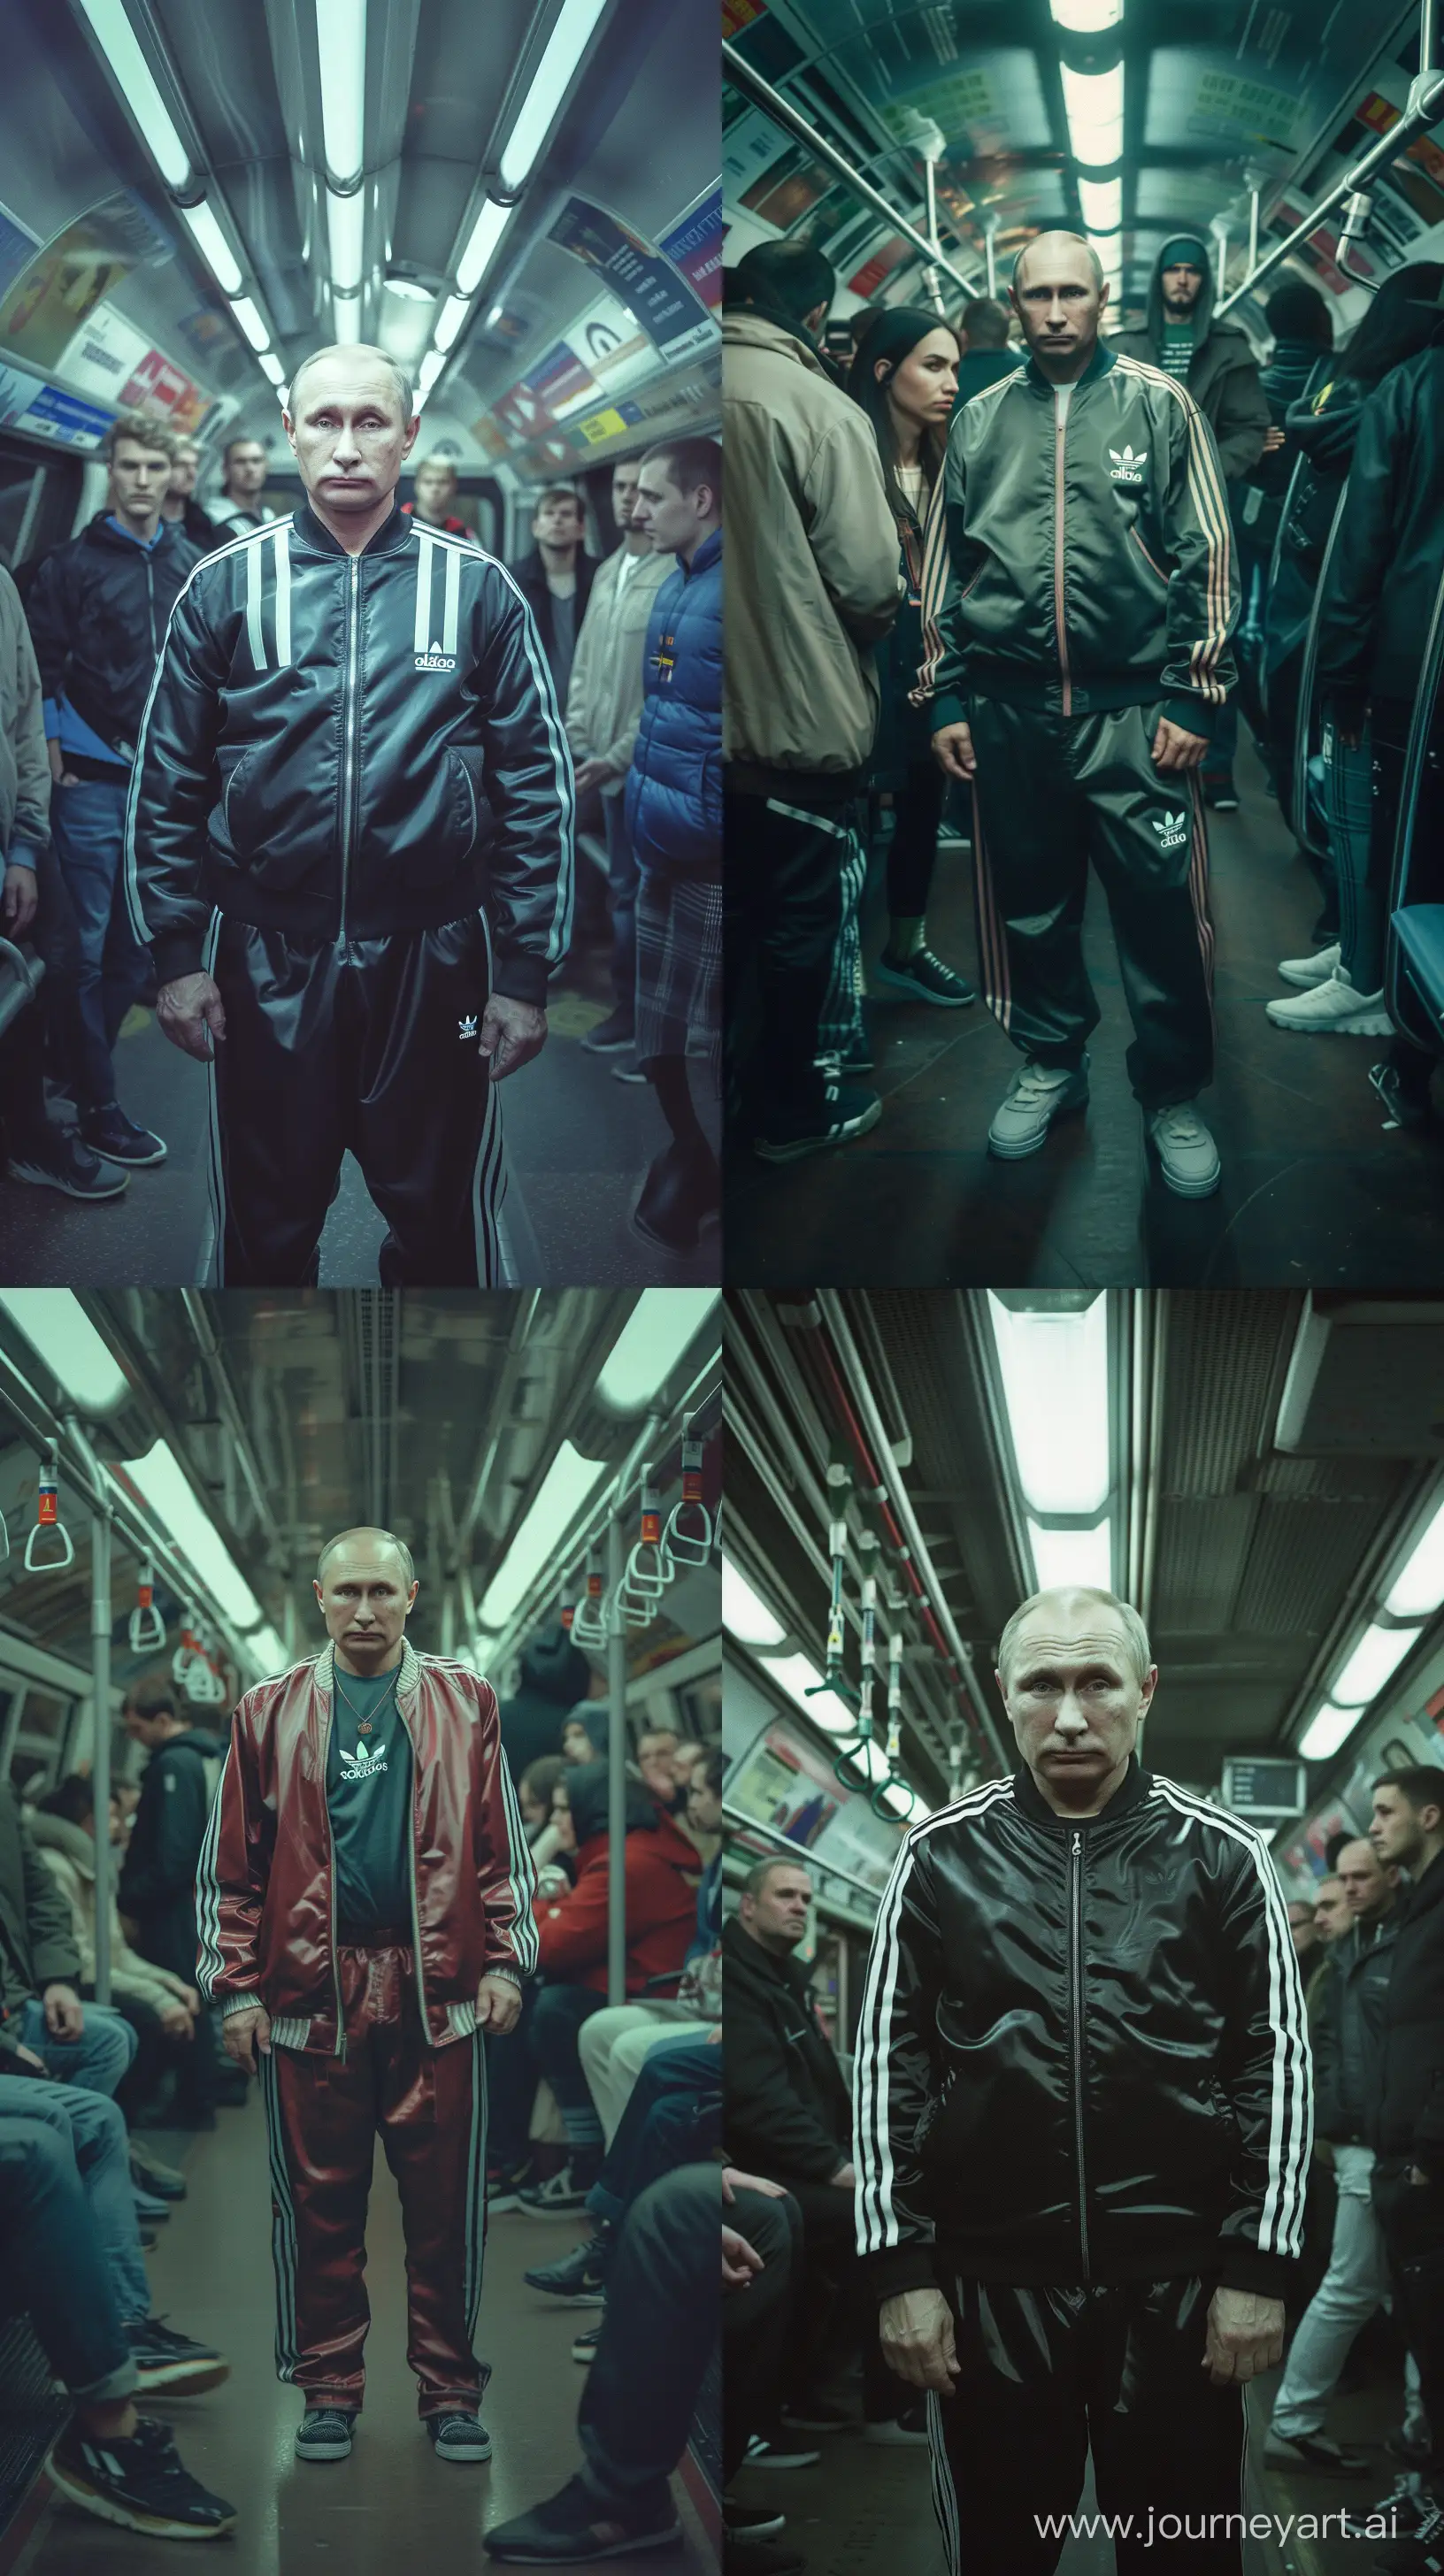 fashion photoshoot, a FullBody portrait of some bad flirty and arrogant Vladimir Putin in metro underground London, vinyl clothes from electronic music style, tight rubber adidas tracksuit combined with tech wear, Analog Night Photography, Cinestill 800 T, shot on Yashica T5, zoomed out, fullbody shot, full view of room, much independent people around, led hard lighting by Sophie Spinelle, he looks flirty and arrogant, hyper realistic, photo realistic, heavy detail --ar 9:16 --v 6